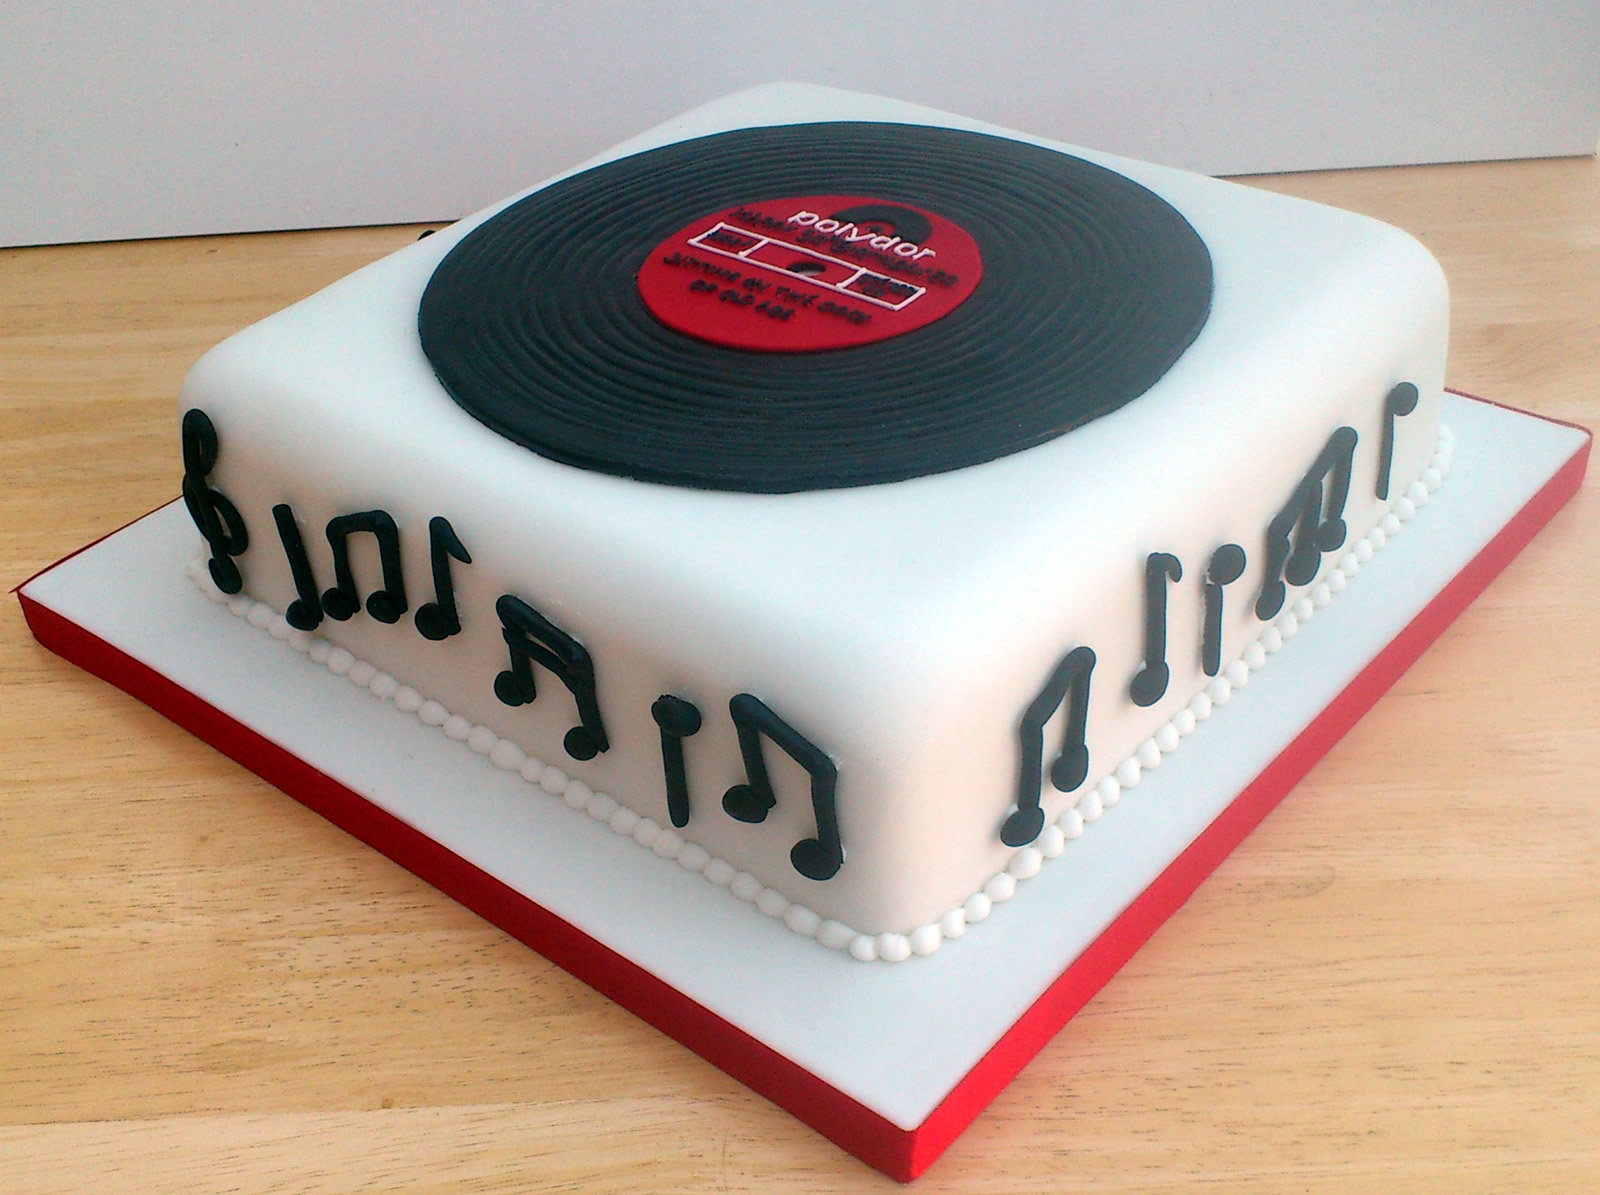 Pin Vinyl Record Art Make And Crafts With Records Hgtv Cake on 